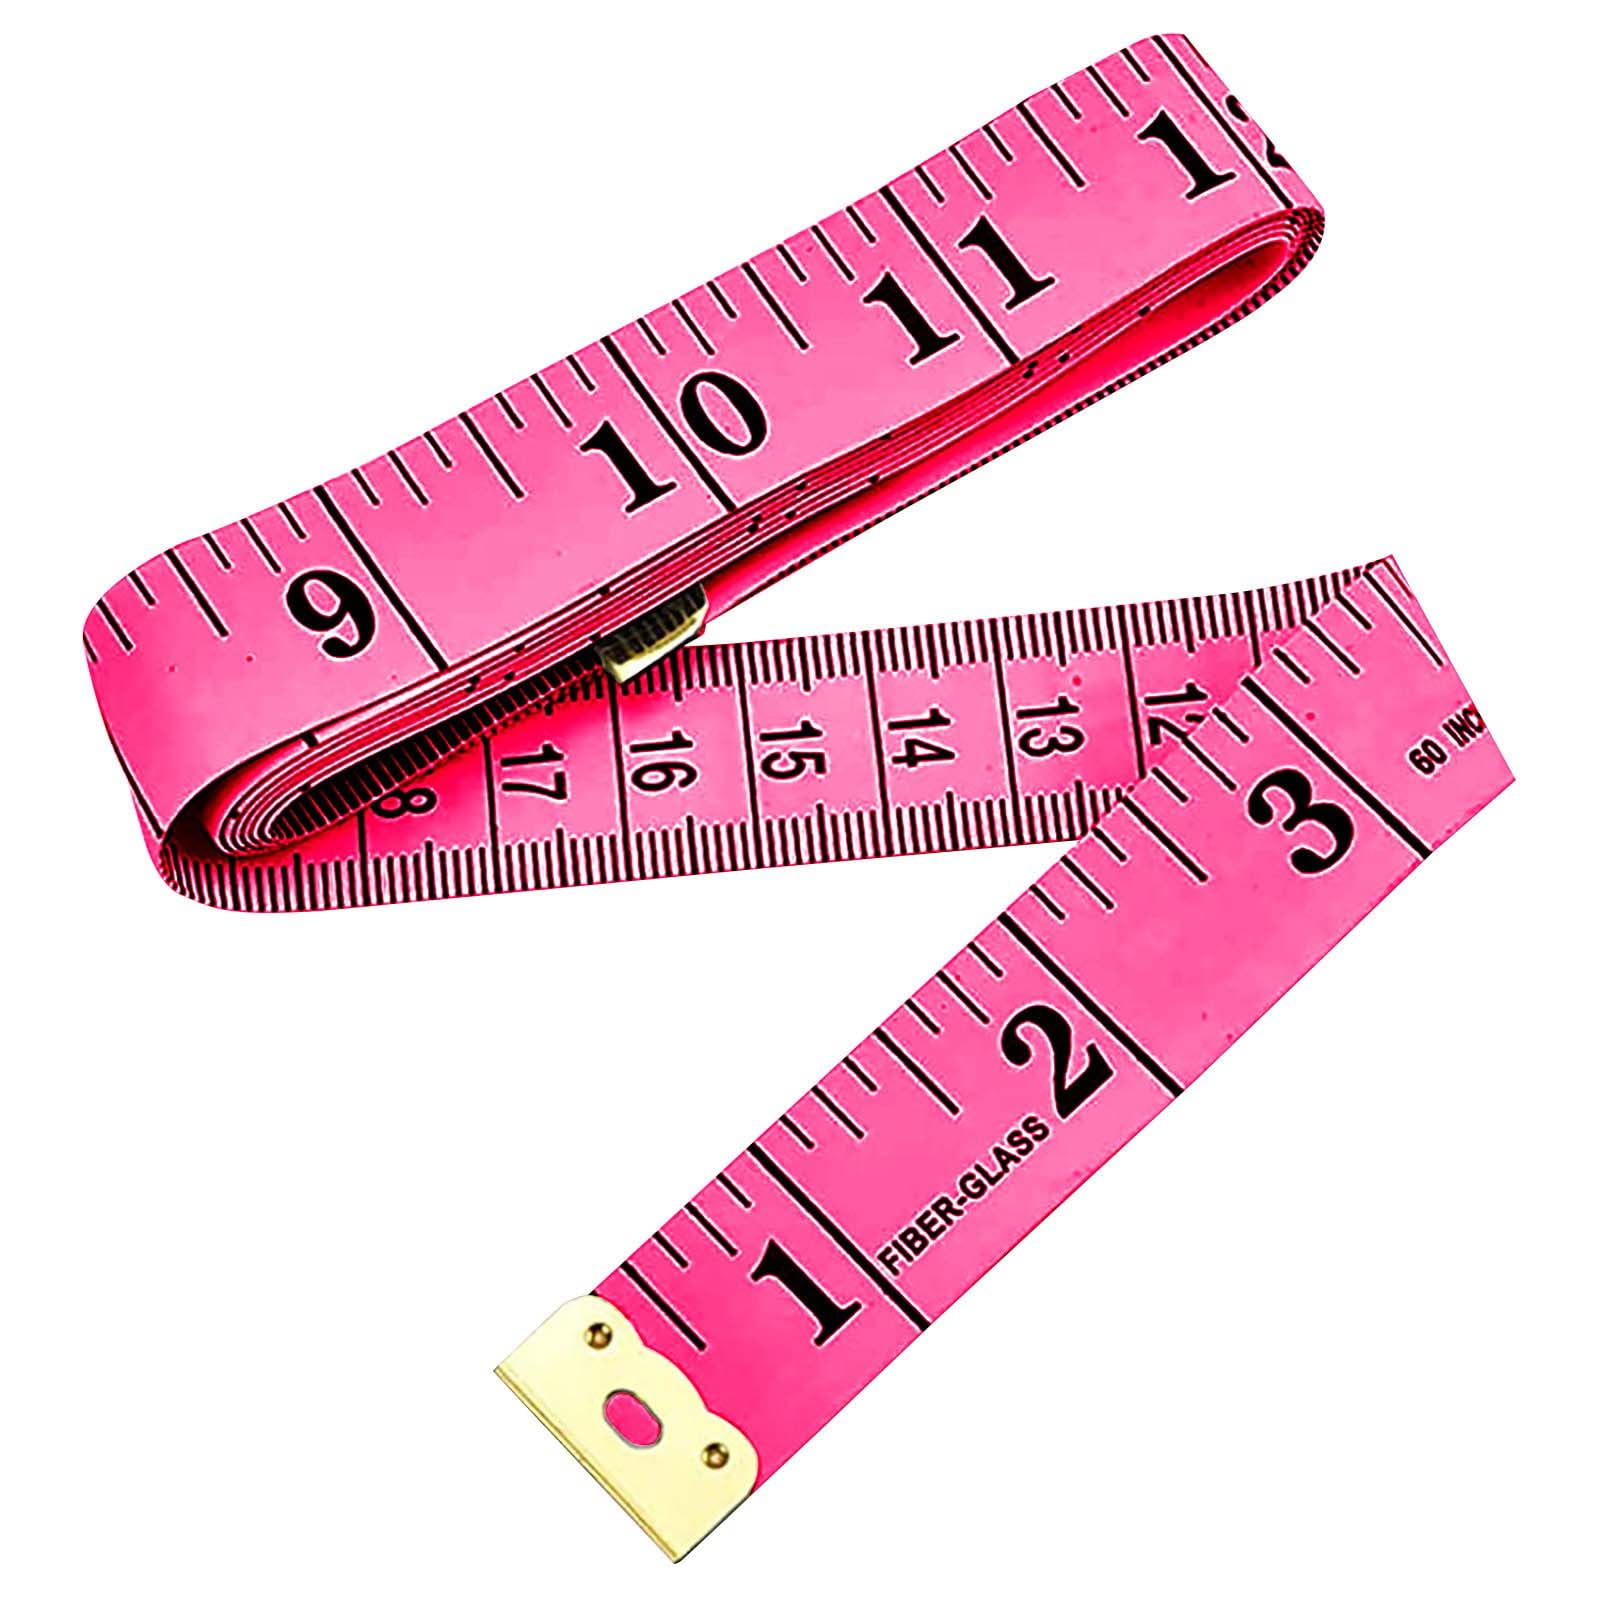 59 Inch/1.5 m Retractable Measuring Tape for Sewing Fabric Craft Cloth and Body Measurement 3Packs Mini Tape Measure Pink, Yellow and Green